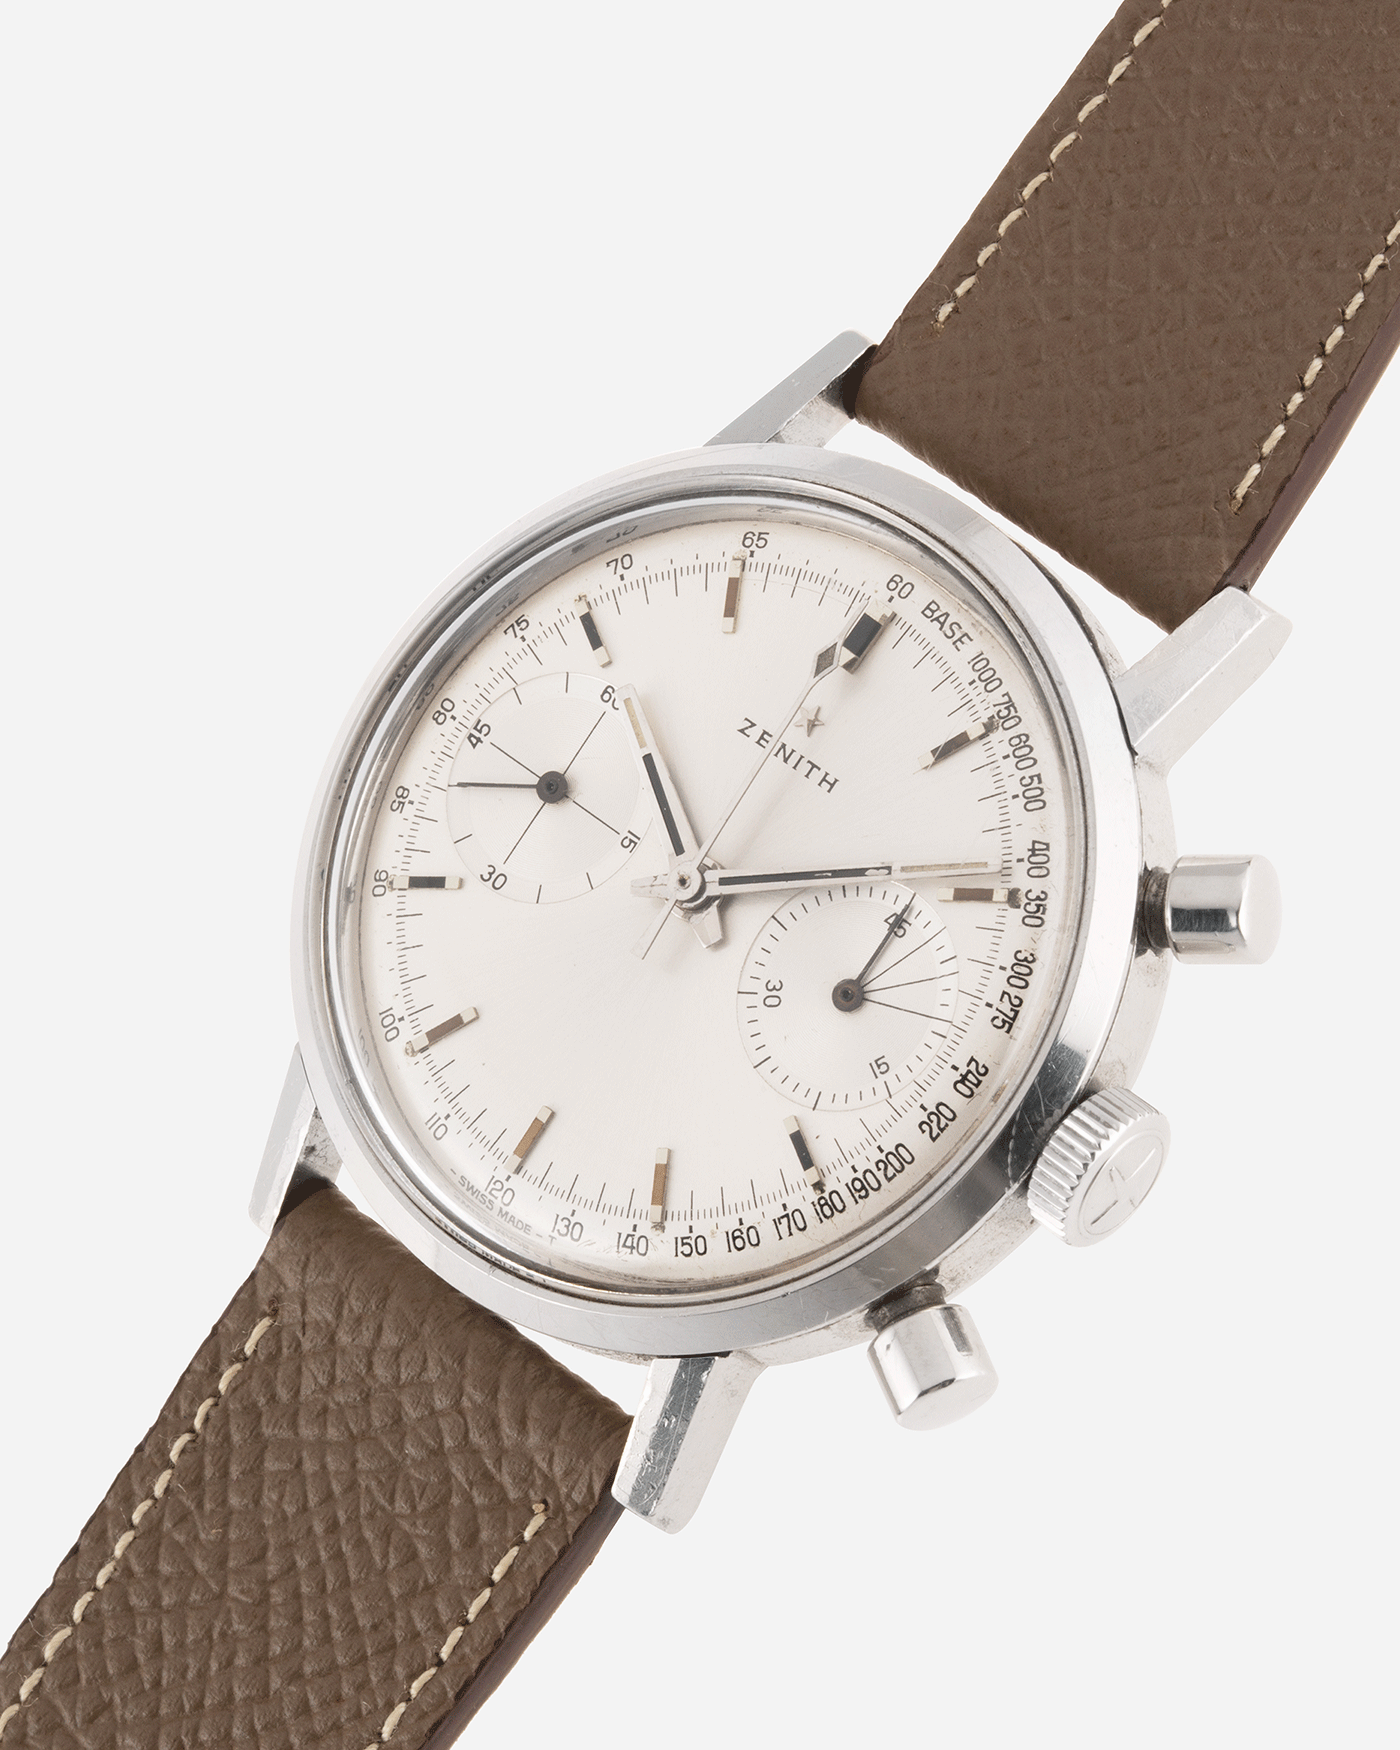 Brand: Zenith Year: 1960’s Model: A271 Reference Number: A271 Material: Stainless Steel Movement: Cal 146DP Case Diameter: 37mm Lug Width: 19mm Strap: Nostime Taupe Grained Calf